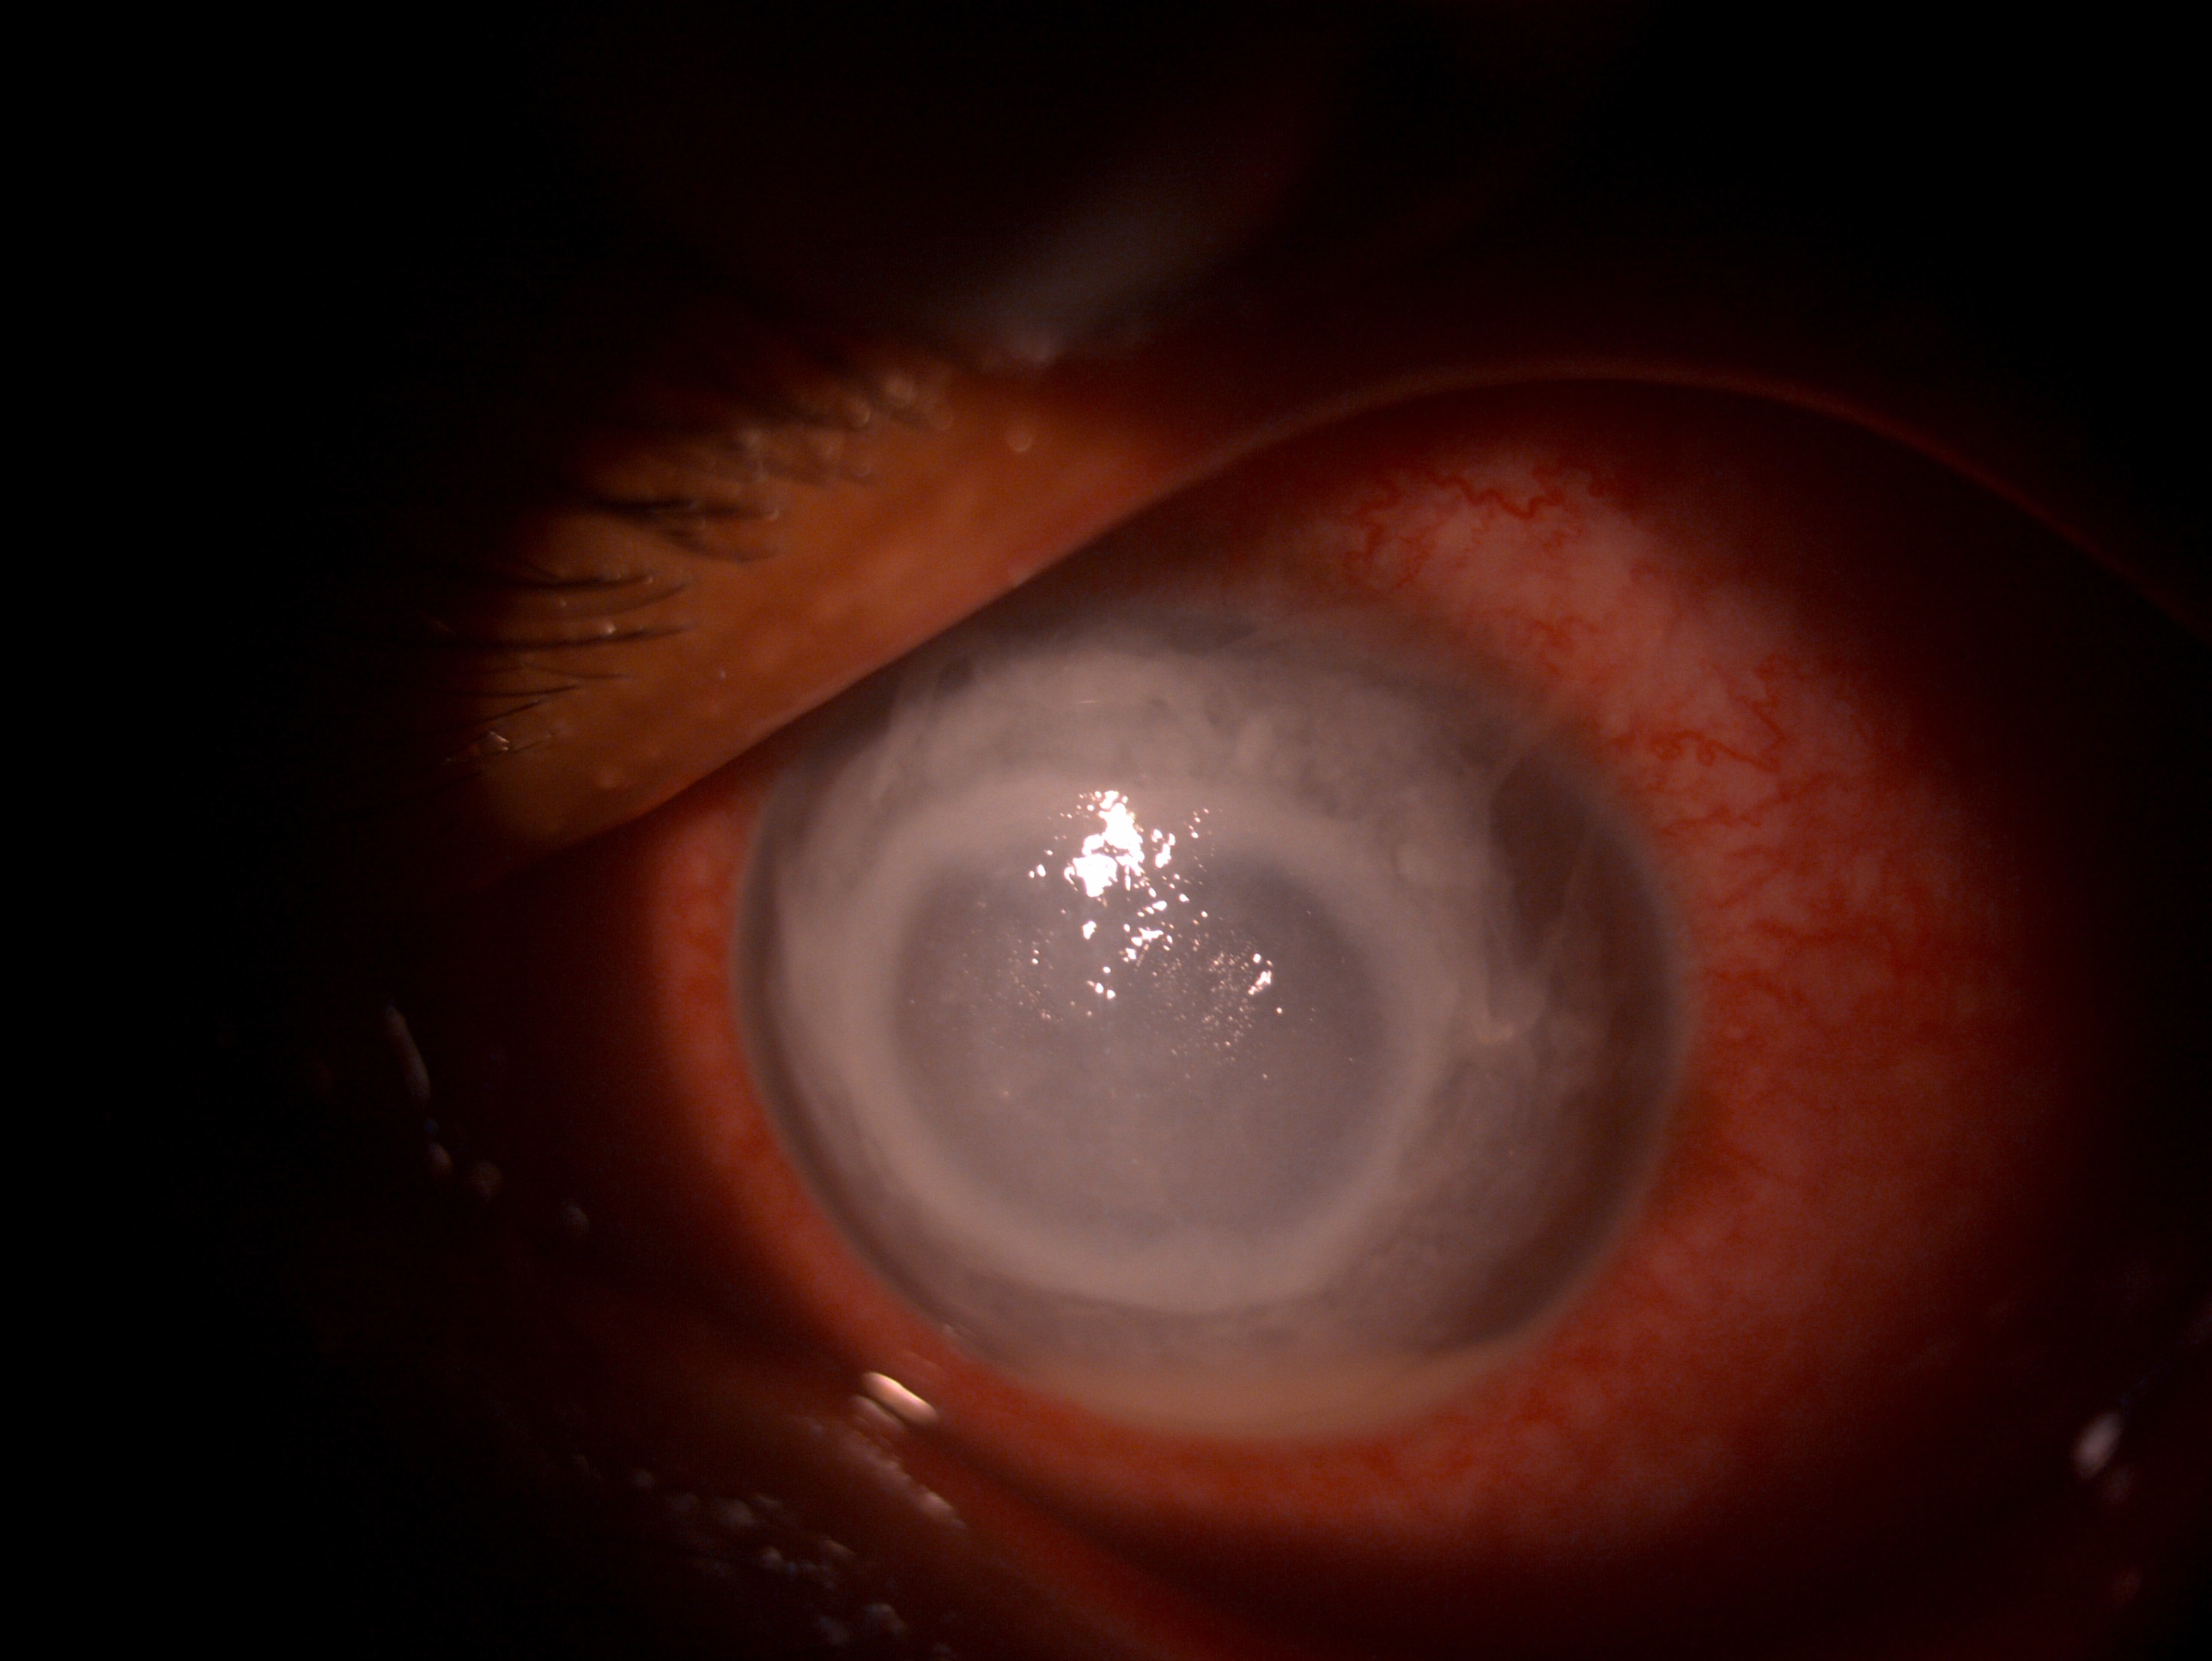 Slit lamp image of the patient depicting Klebsiella endogenous endophthalmitis in a patient with chronic urinary tract infection